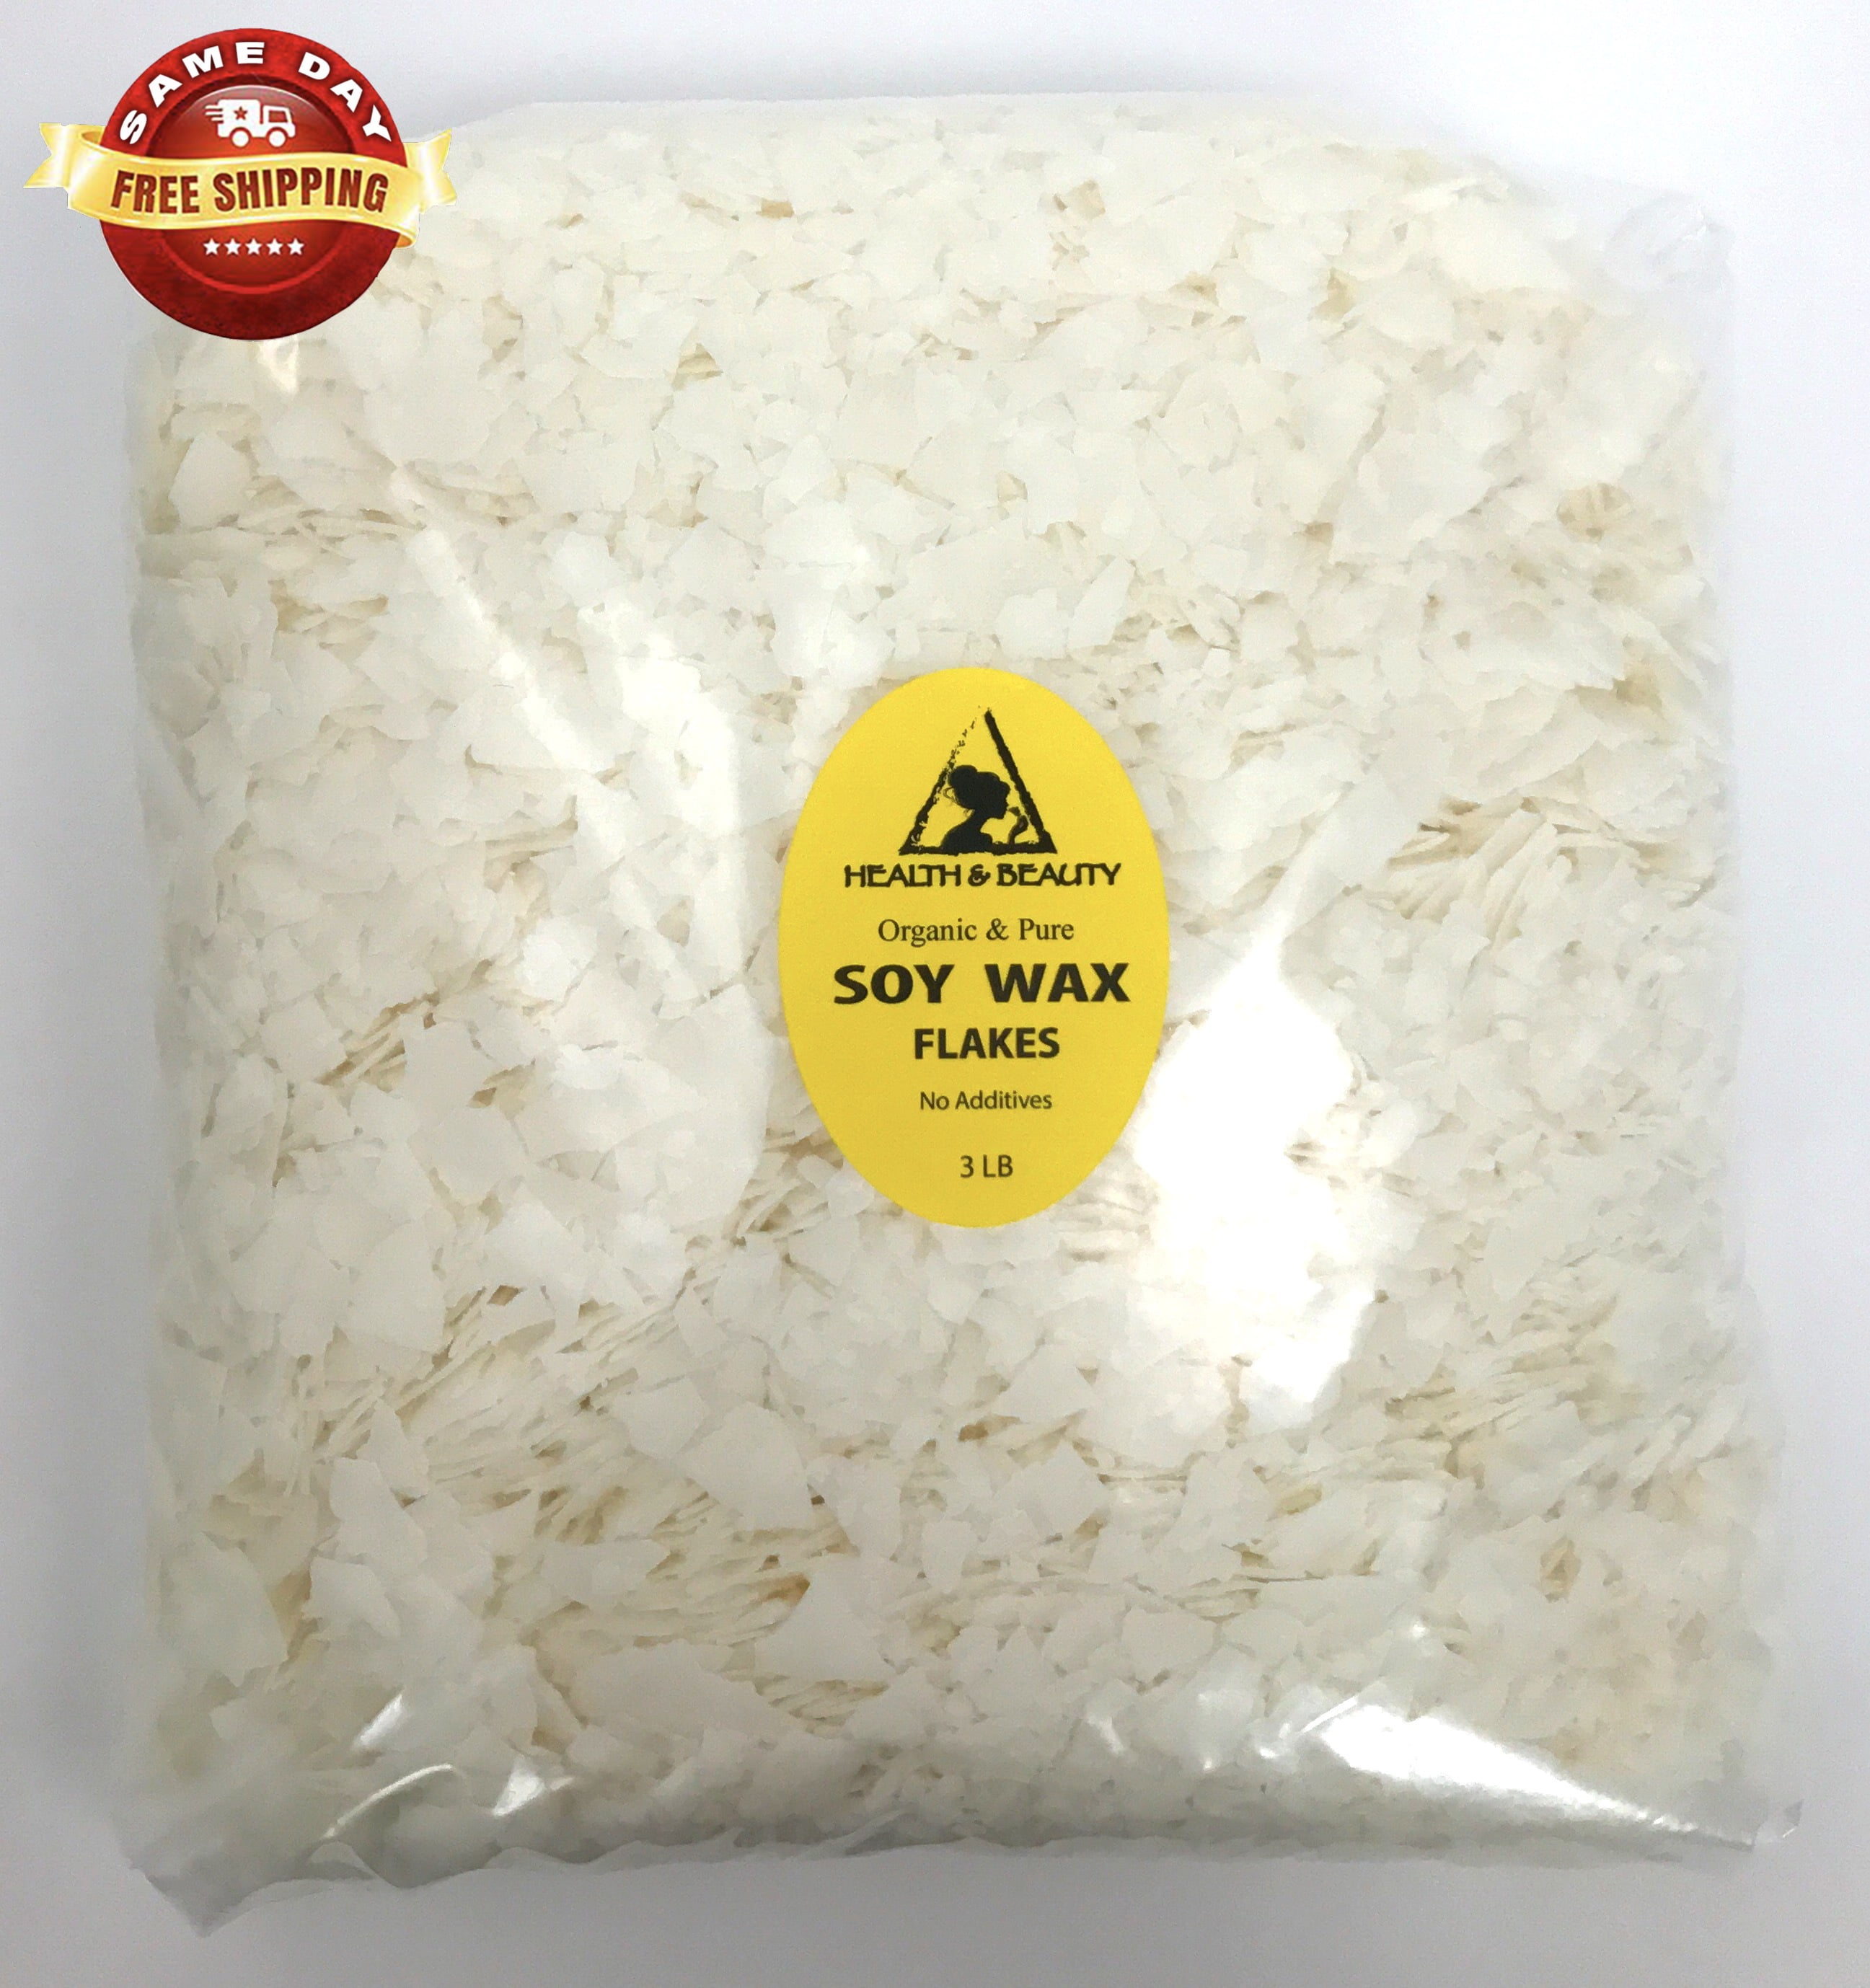 TRINIDa Soy Wax Flakes, Premium Natural Candle Wax 5LB, 100% Soy Wax for  Candle Making from Organic Farm, No Additives, Harmless and Pure